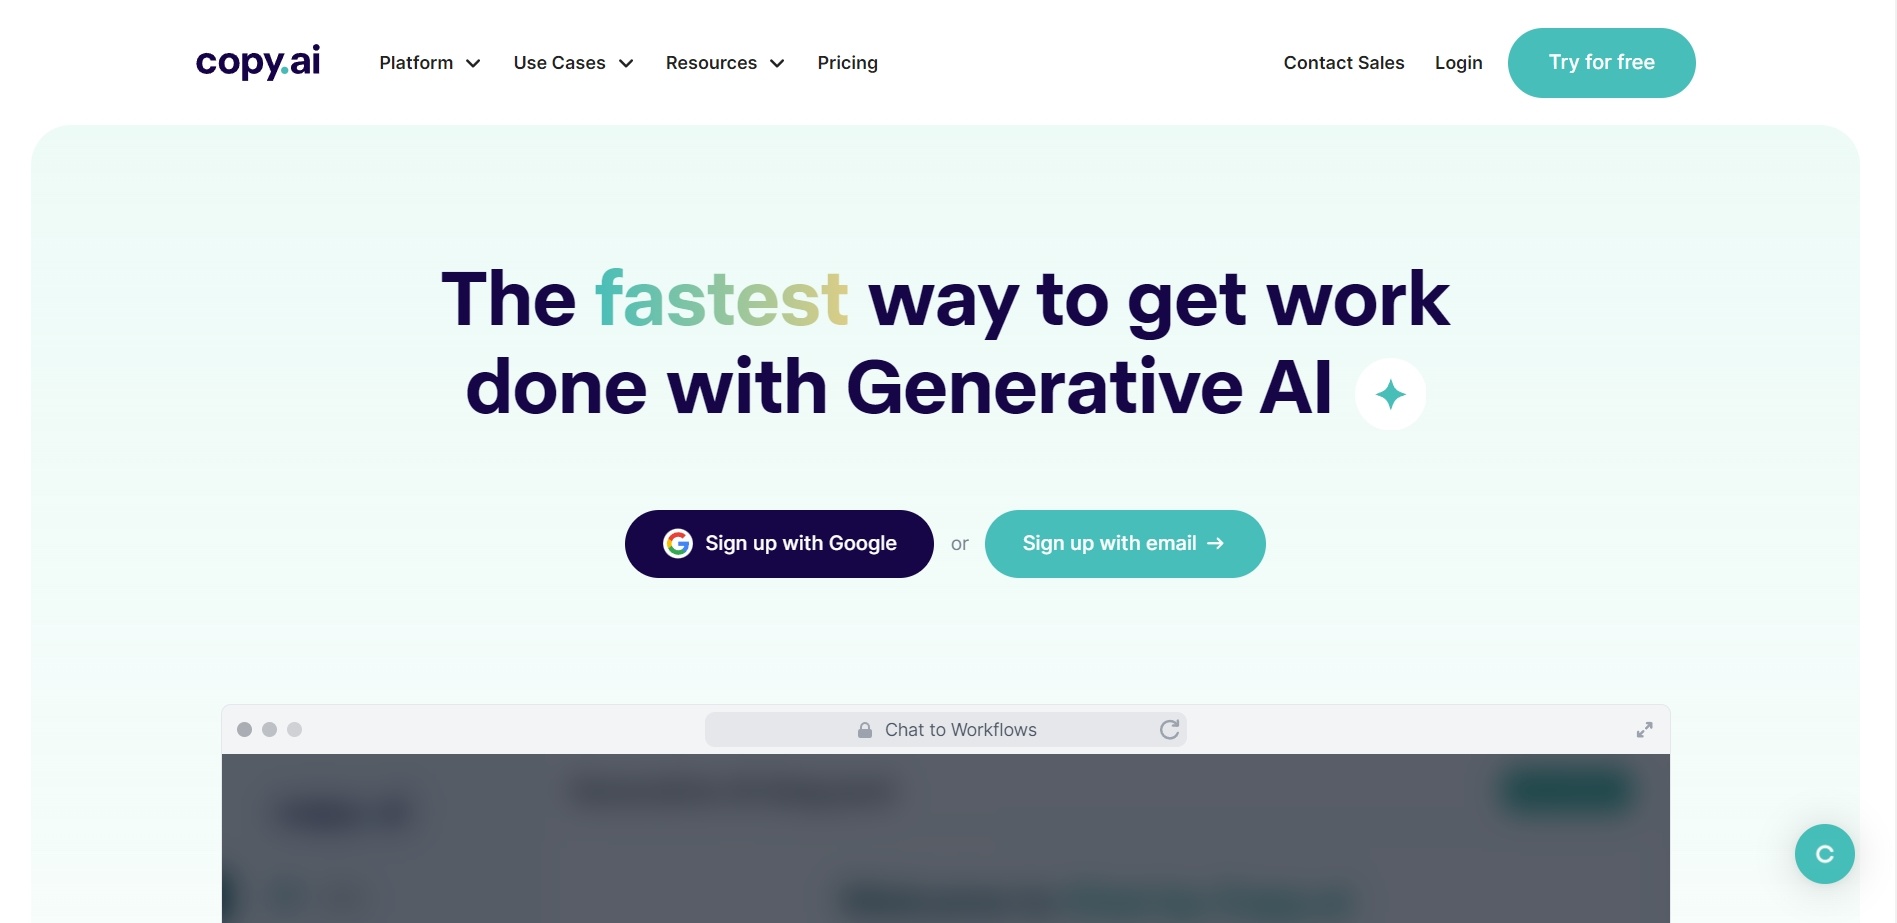 Home page of Copy.ai’s content tool